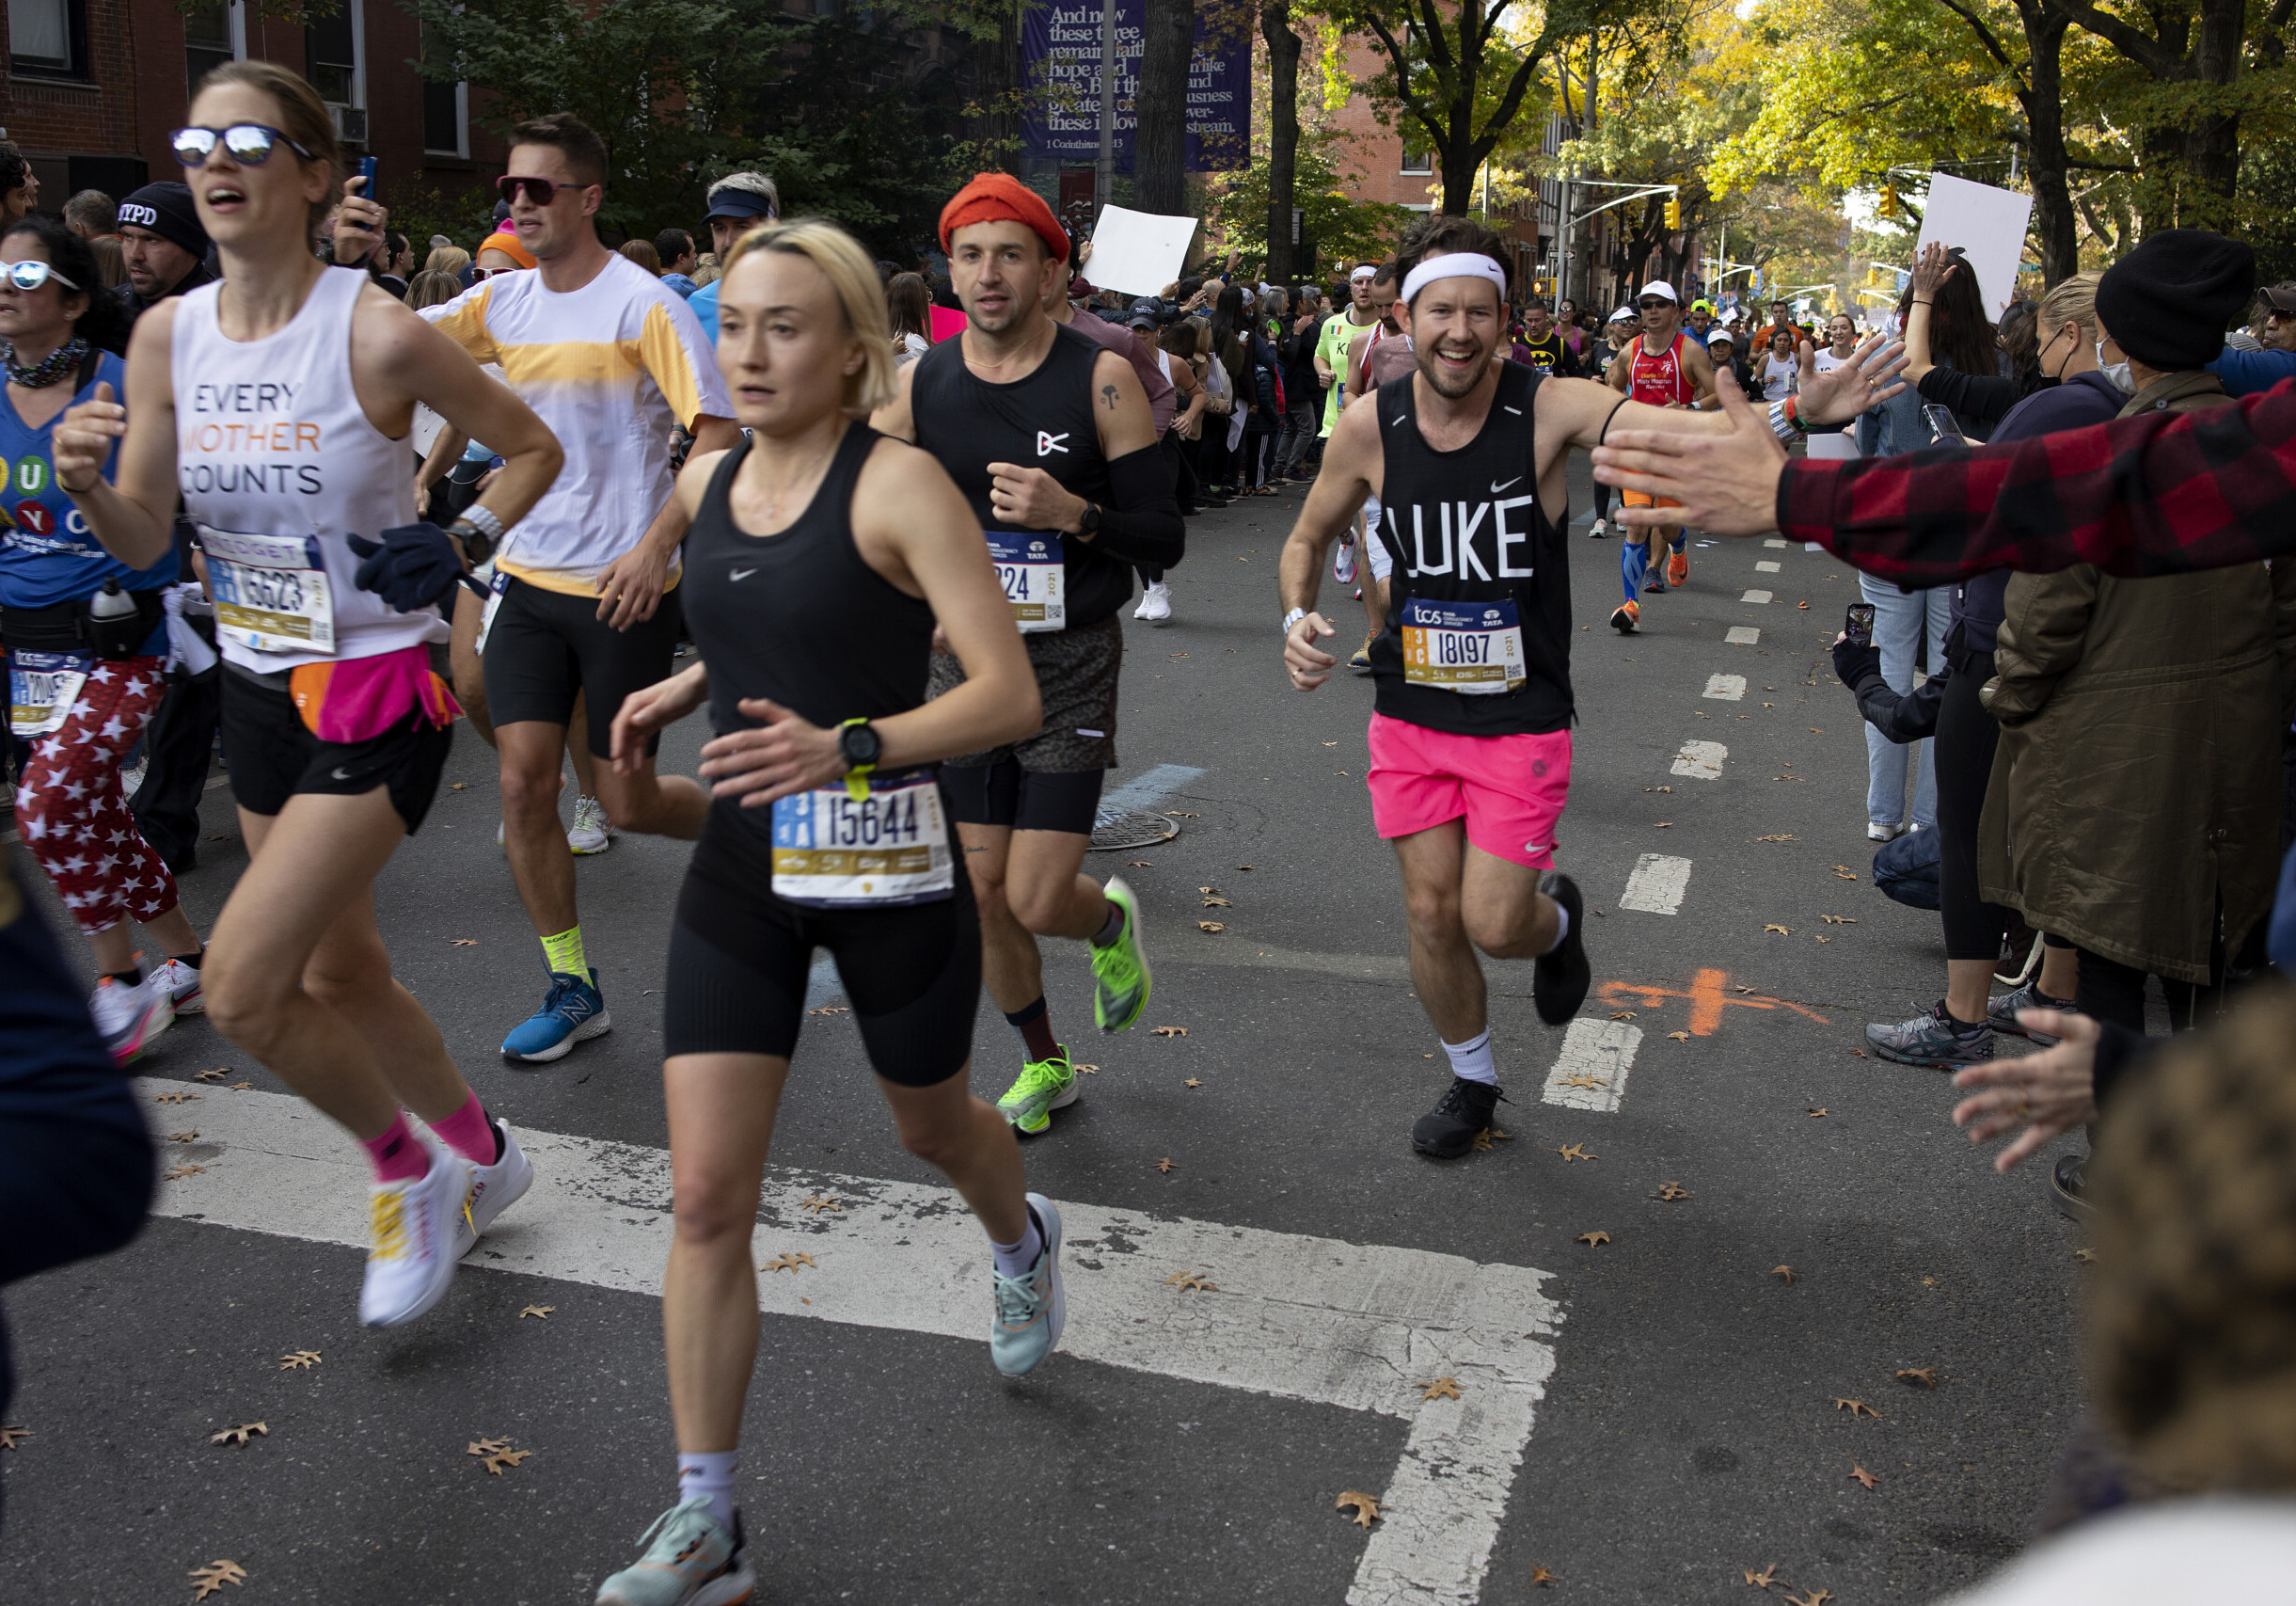 BROOKLYN, NEW YORK - NOVEMBER 7: Crowds cheer on the runners in the New York City 50th Marathon on November 7, 2021 in Brooklyn, New York. (Photo by Andrew Lichtenstein/Corbis via Getty Images)